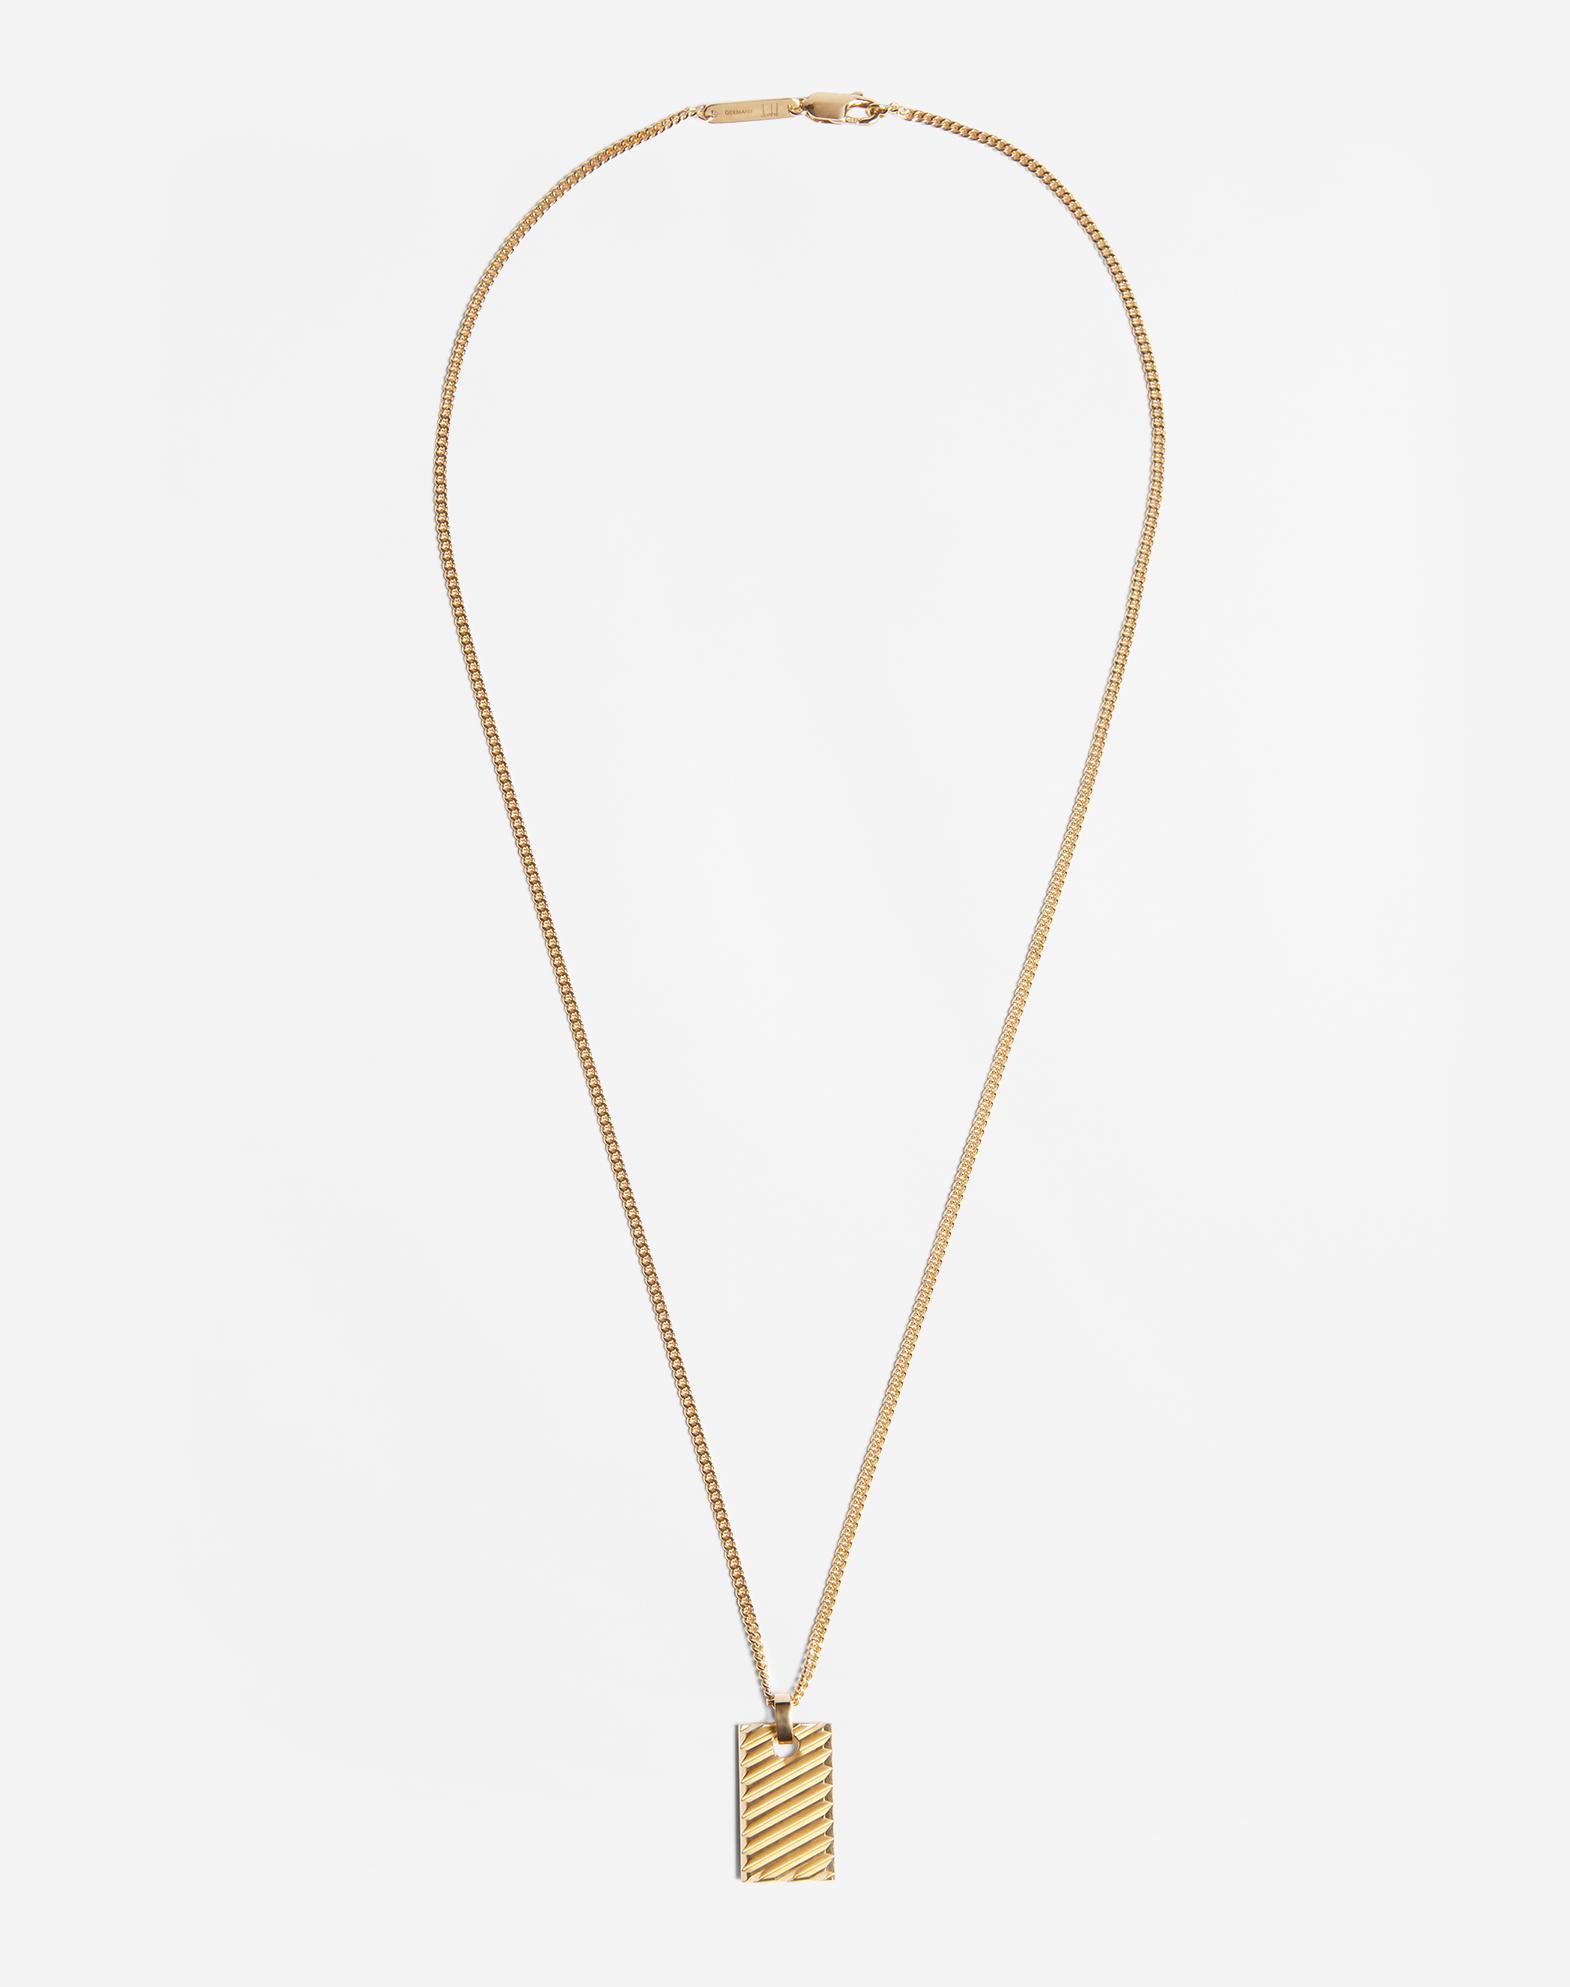 Dunhill Transmission Yellow Gold Necklace